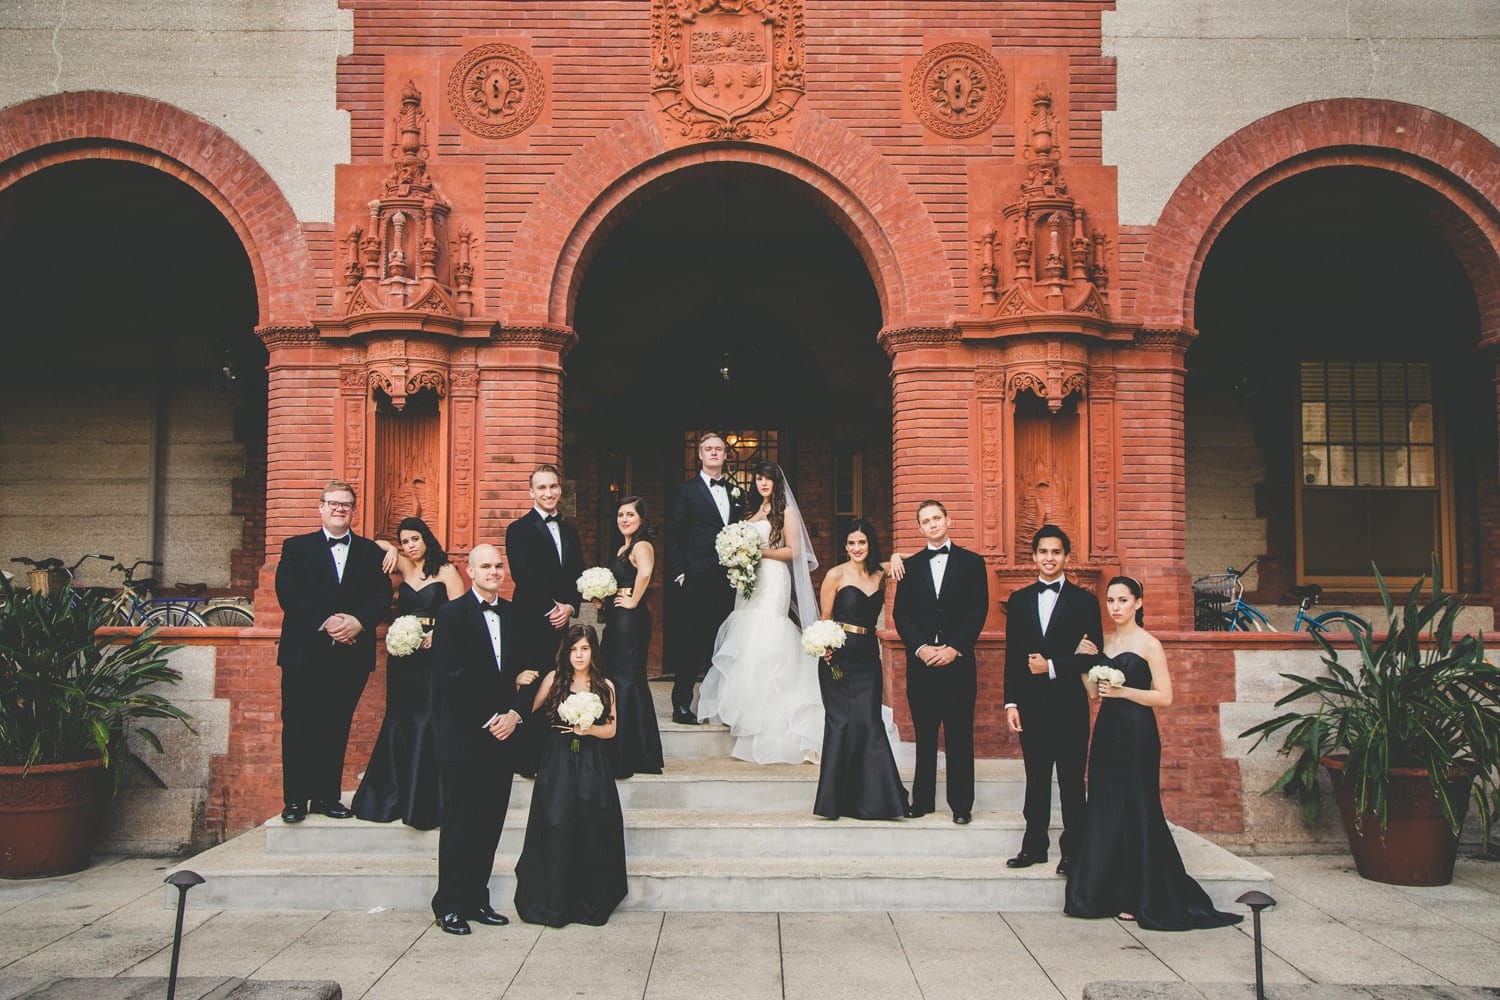 Wedding Party | Modern St. Augustine Wedding at The Treasury on The Plaza